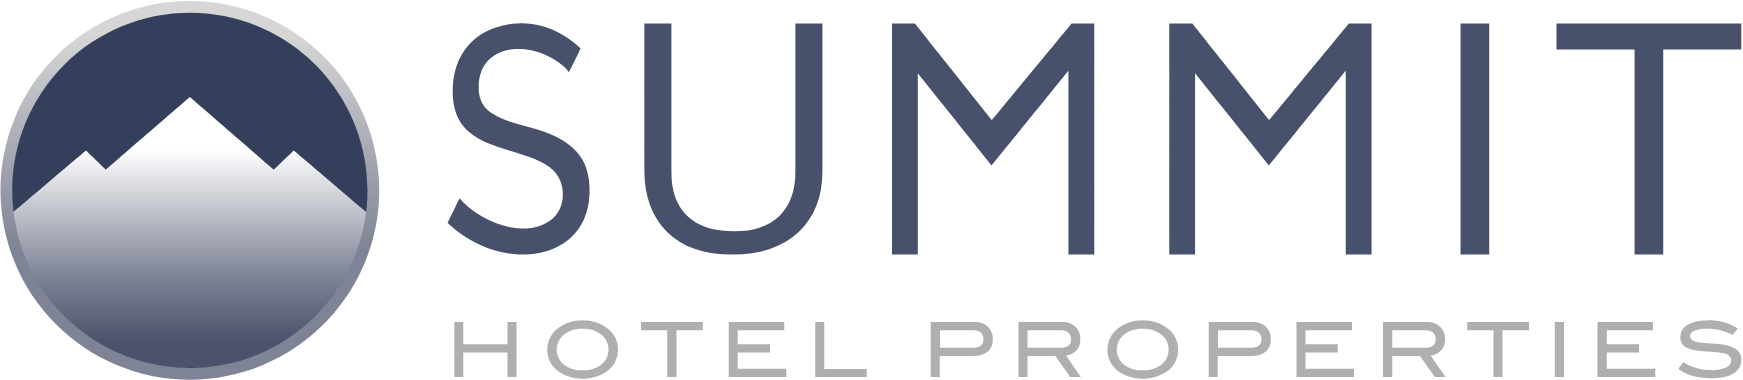 Summit Hotel Properties logo in transparent PNG and vectorized SVG formats